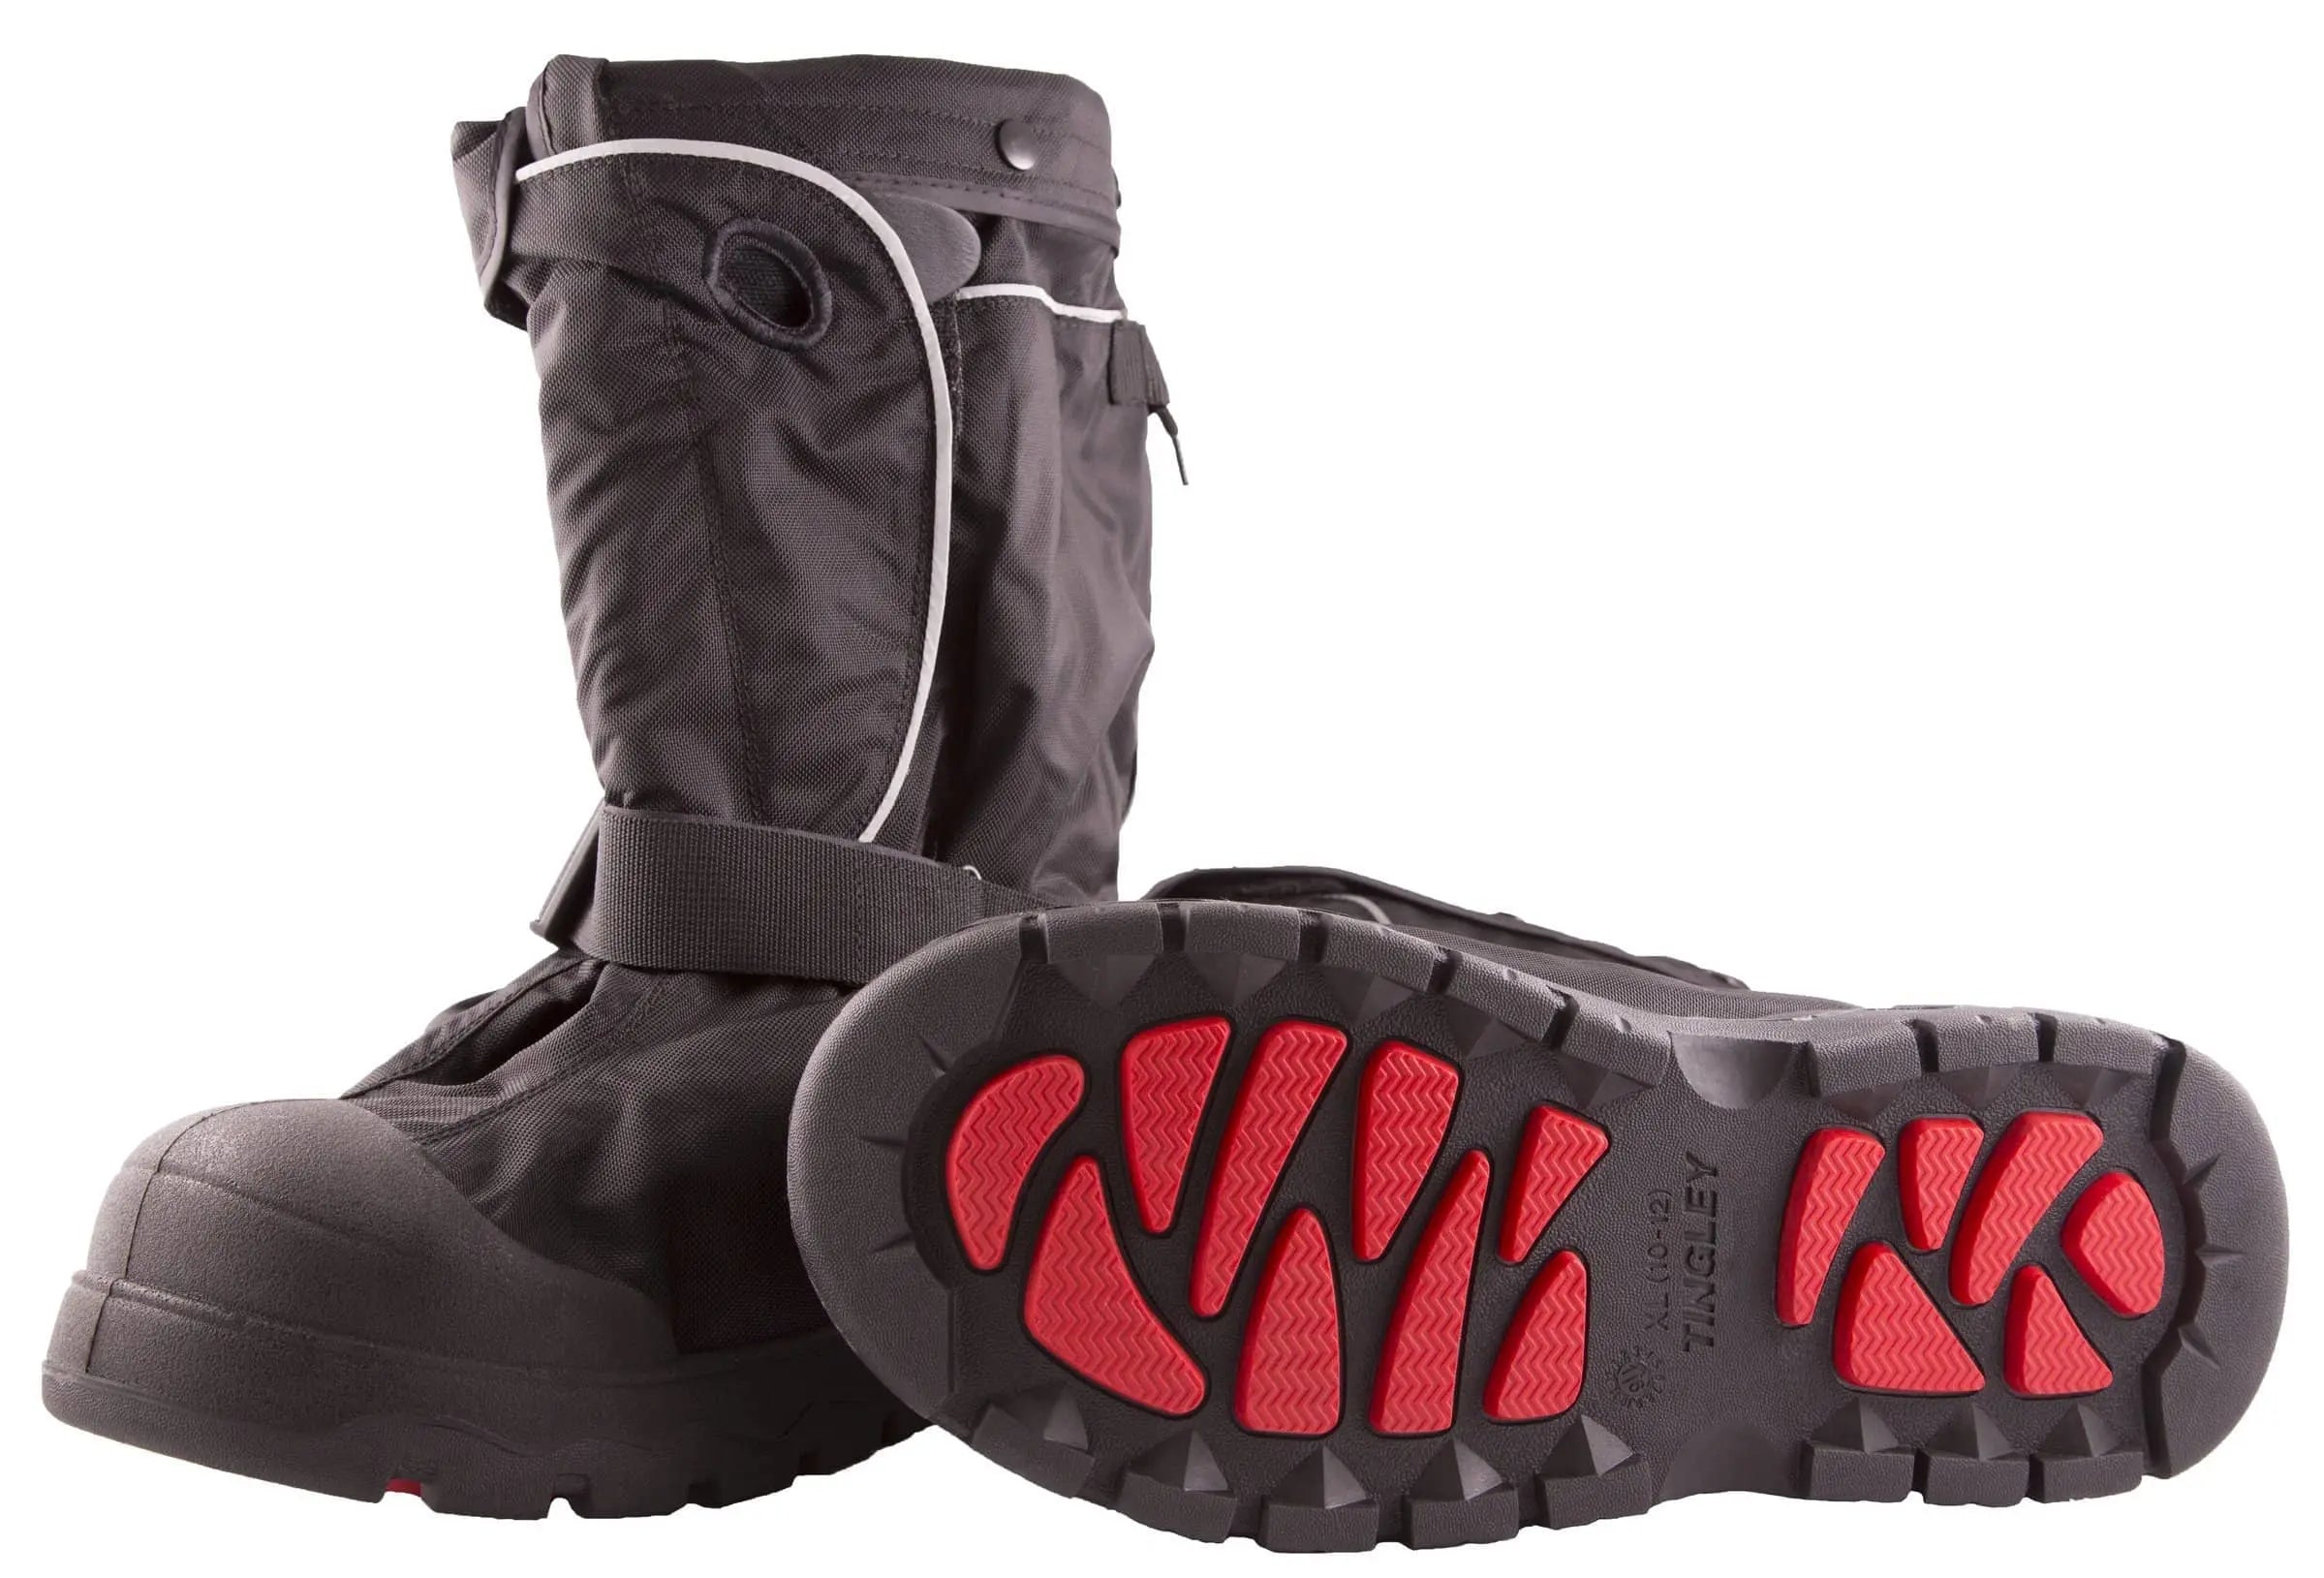 TINGLEY - Orian Winter Overshoe with Gaiter - Becker Safety and Supply